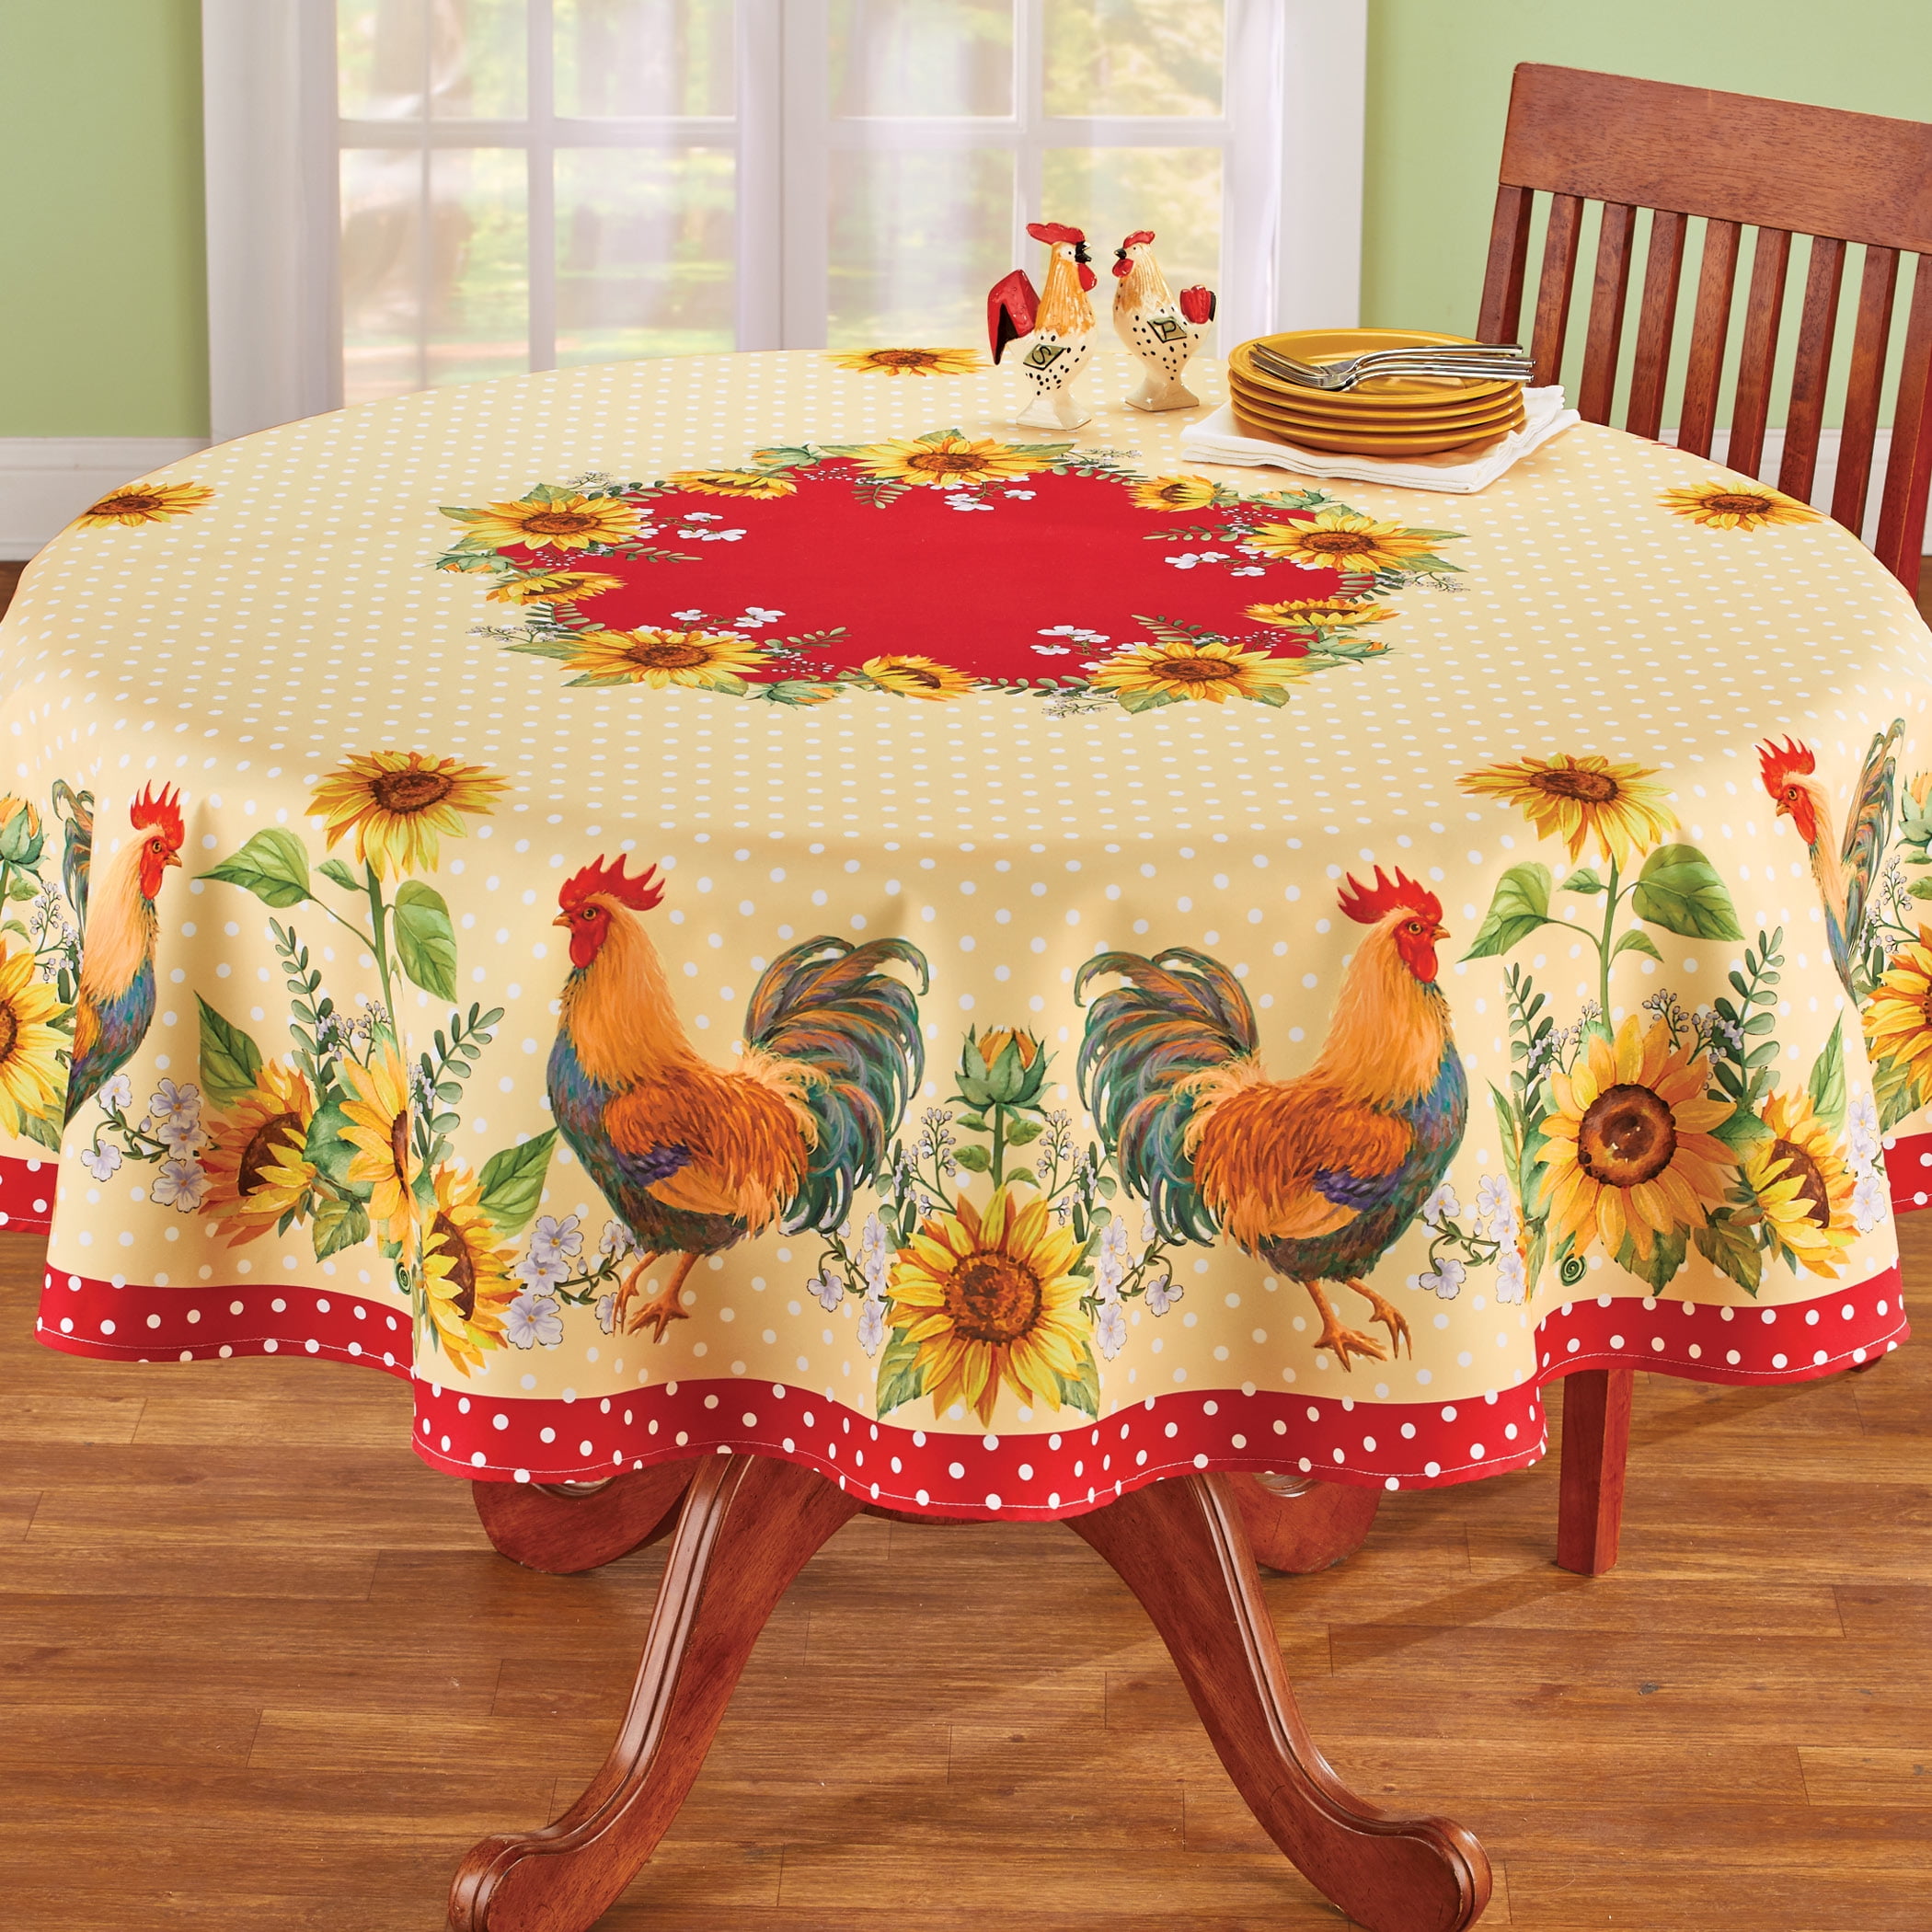 Beautiful Rooster and Sunflower Printed Round Tablecloth ...